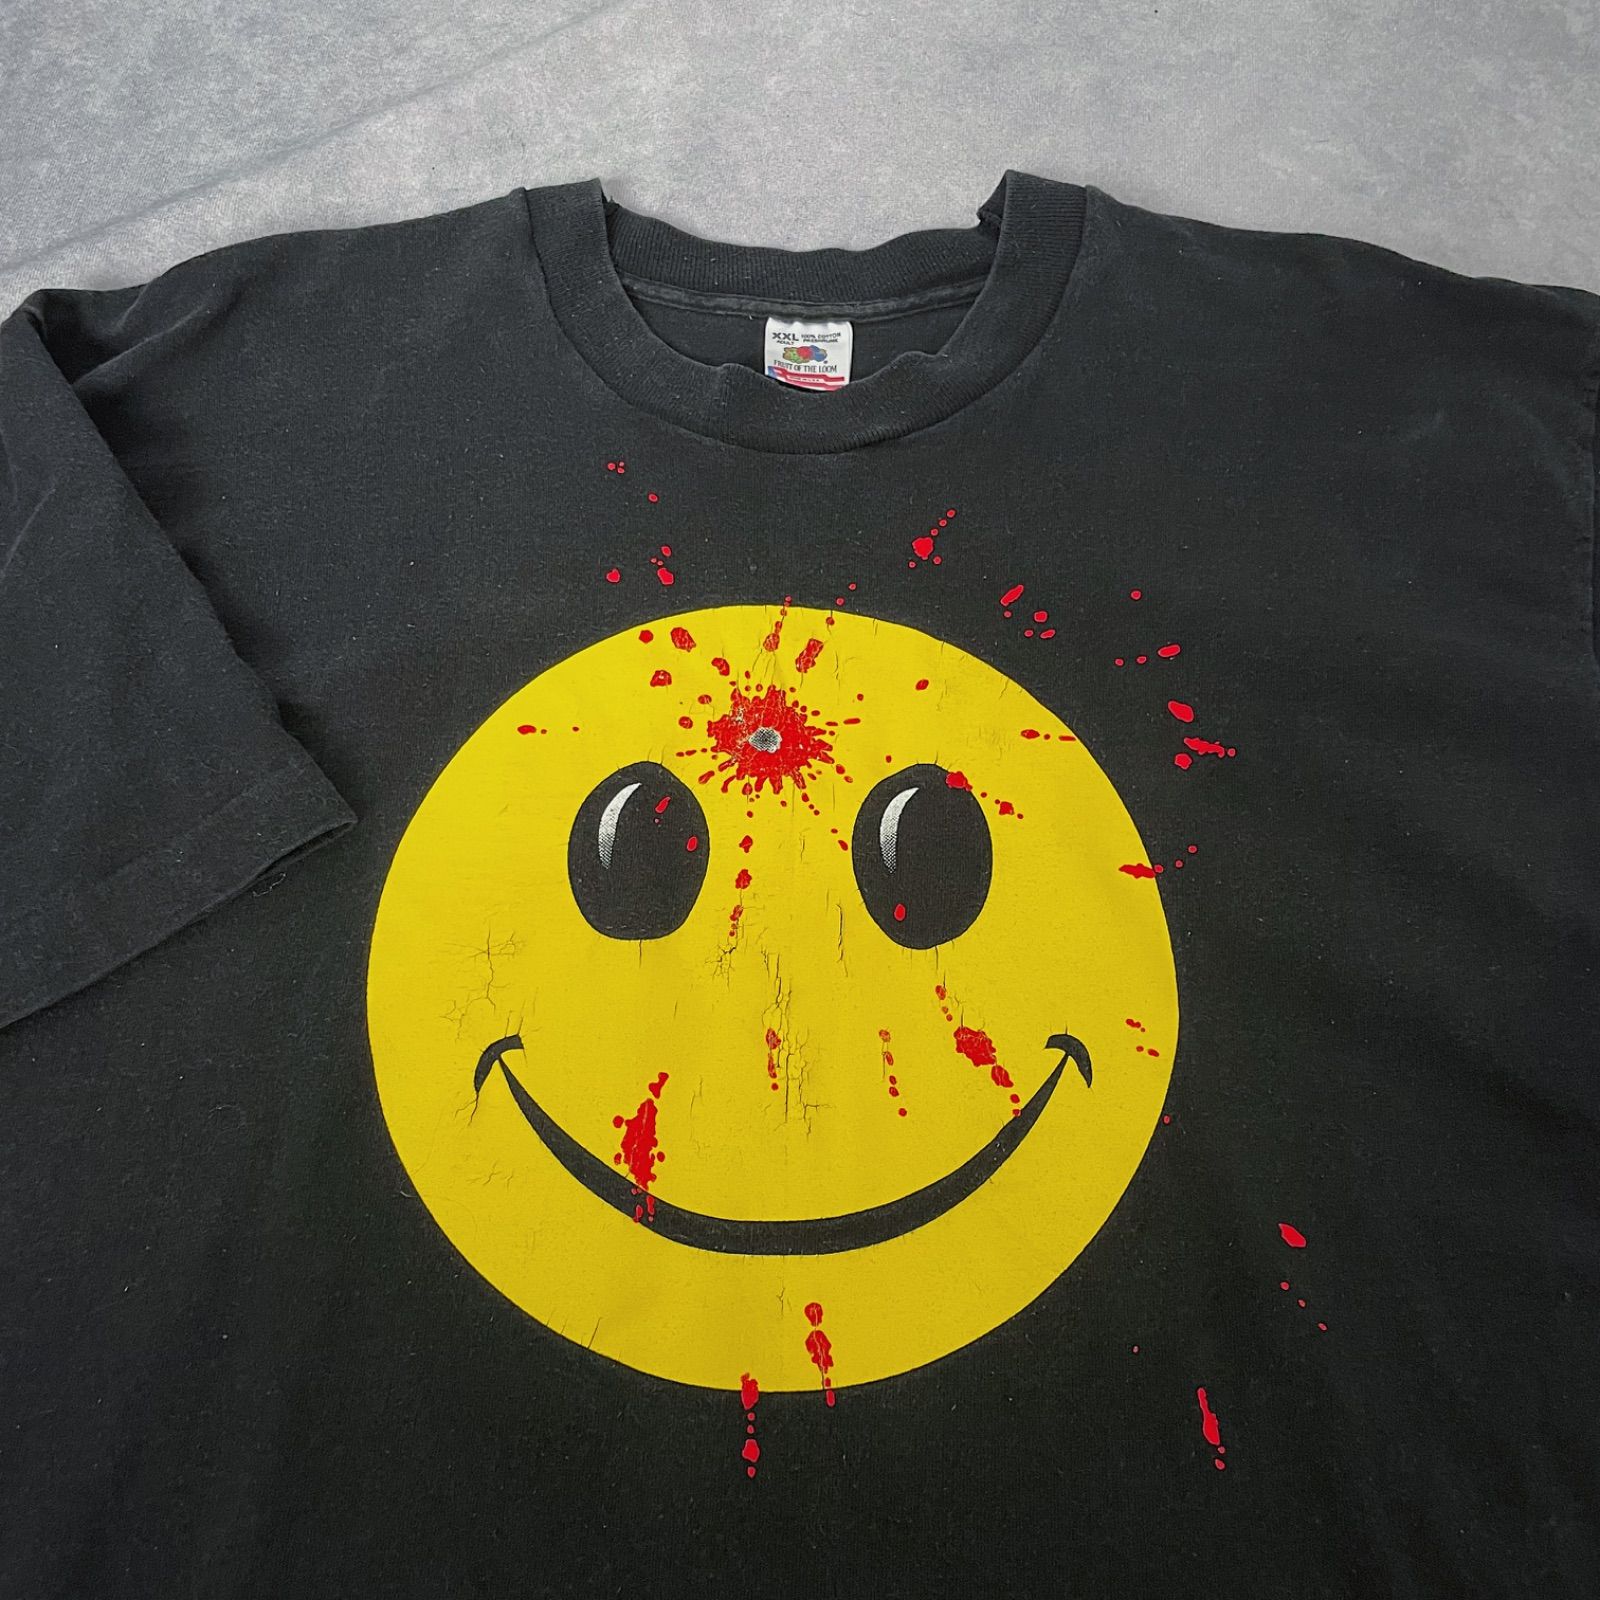 SMILEY FACE ニコちゃん　Tシャツ　90㎝